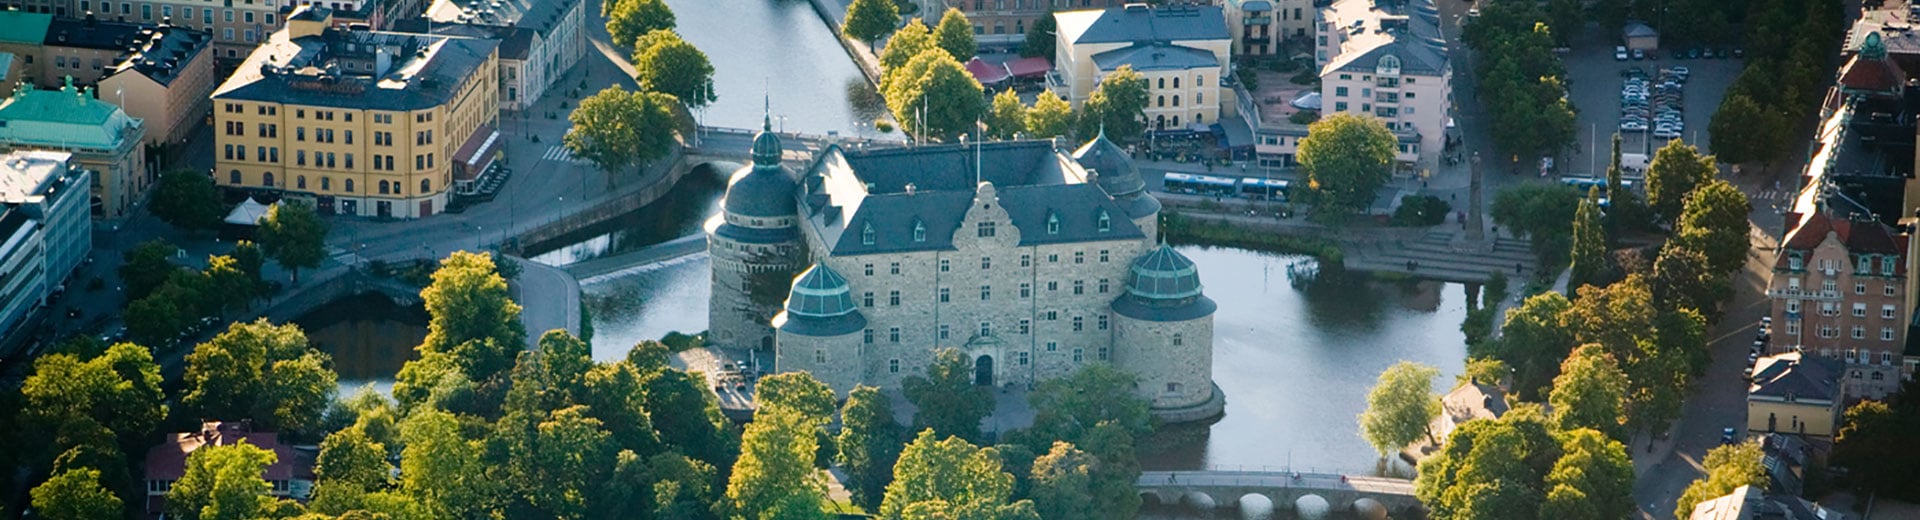 Grant Thornton is your auditing firm in Örebro